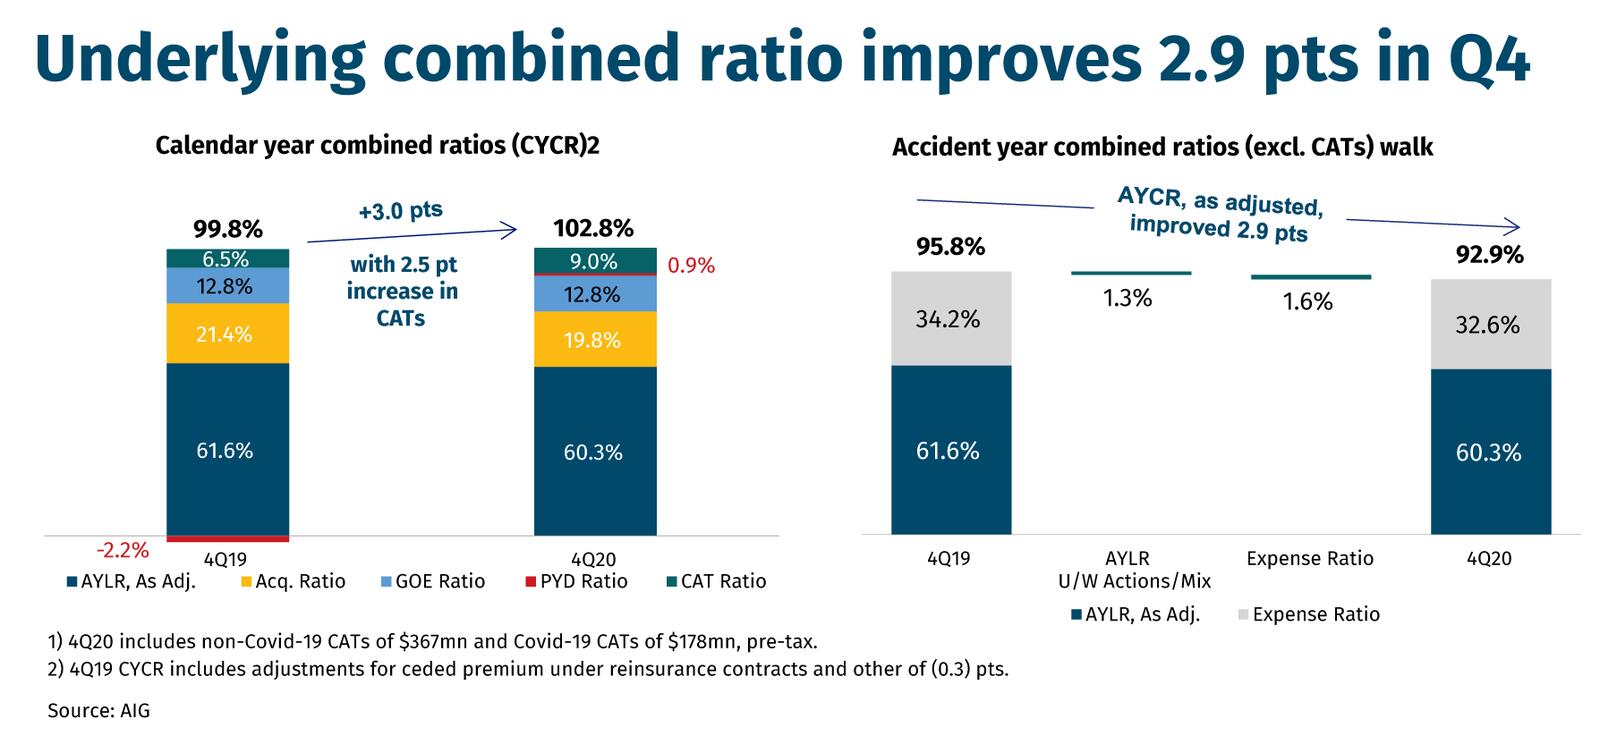 Underlying combined ratio improves 2.9 pts in Q4